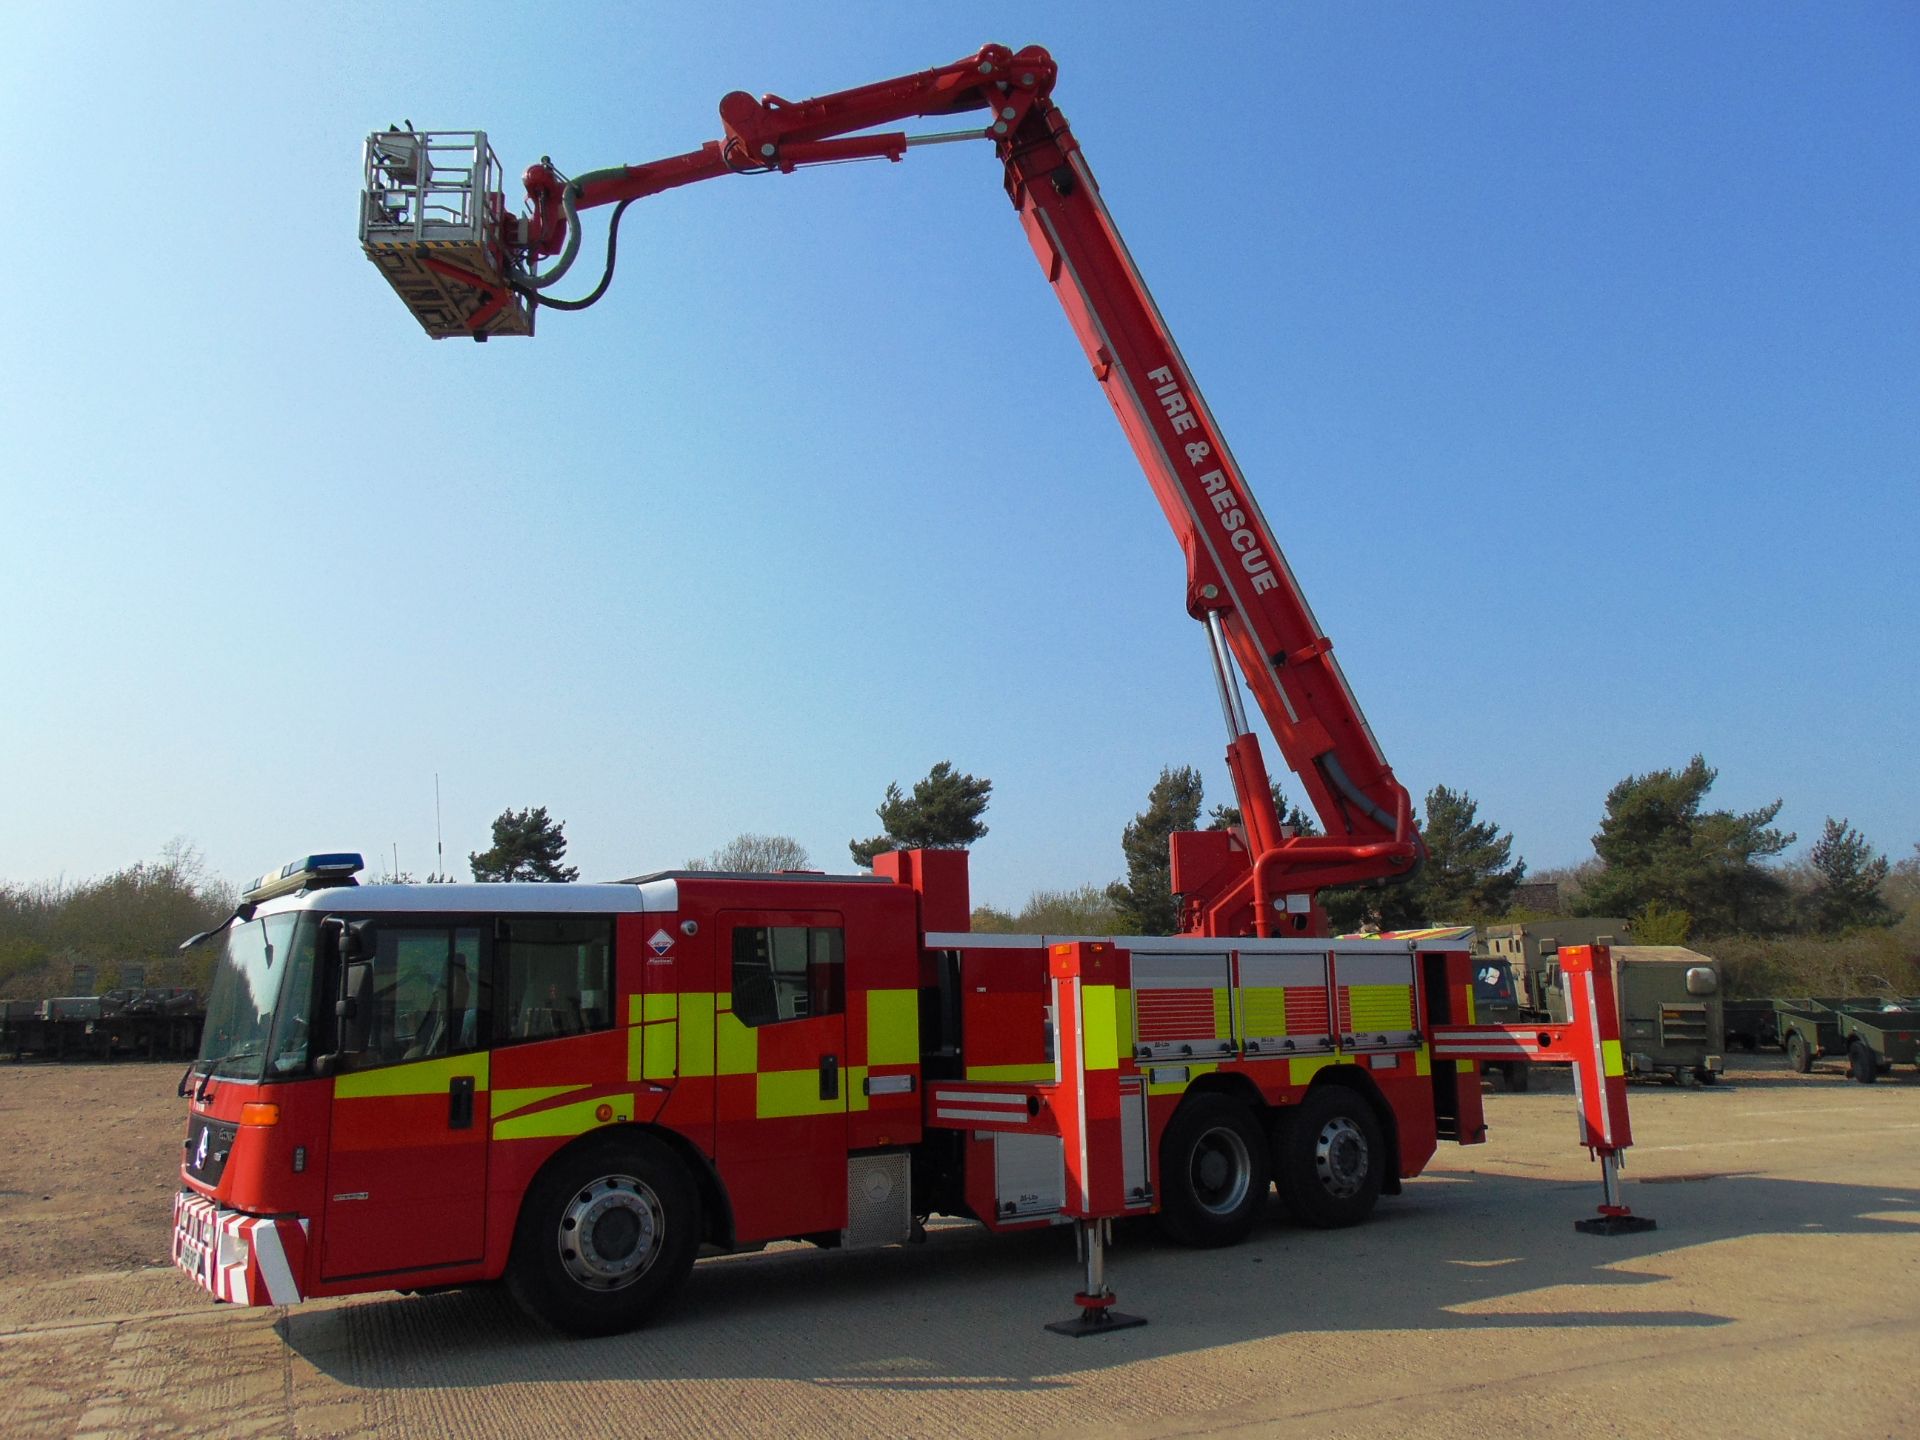 Mercedes Econic 2633 Aerial Rescue Fire Fighting Appliance - Image 18 of 57